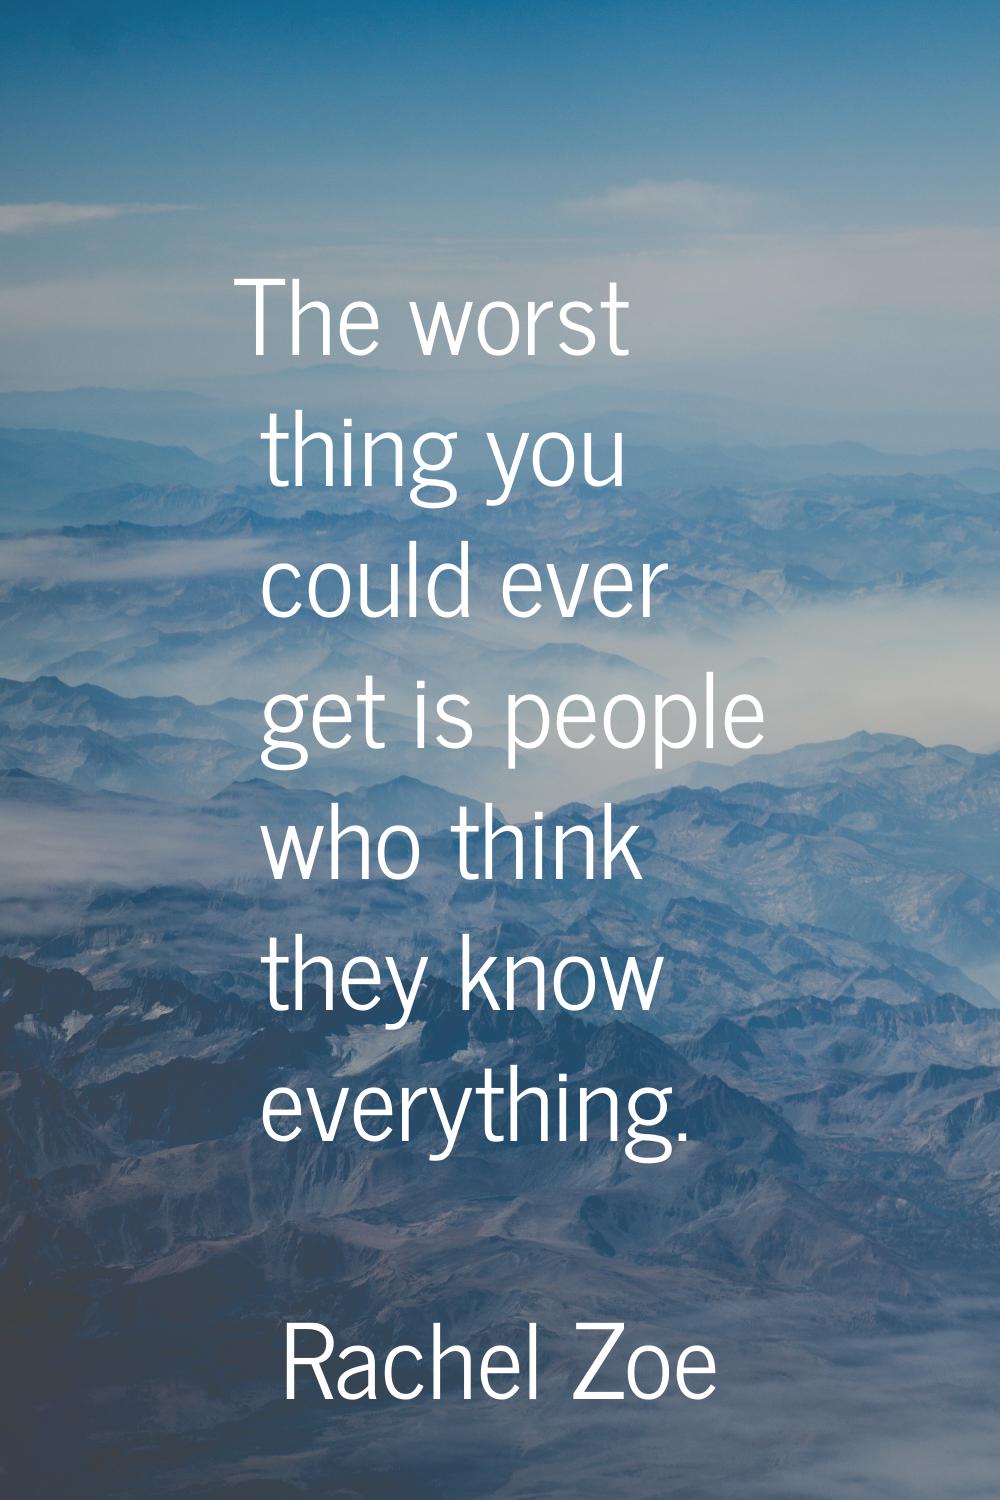 The worst thing you could ever get is people who think they know everything.